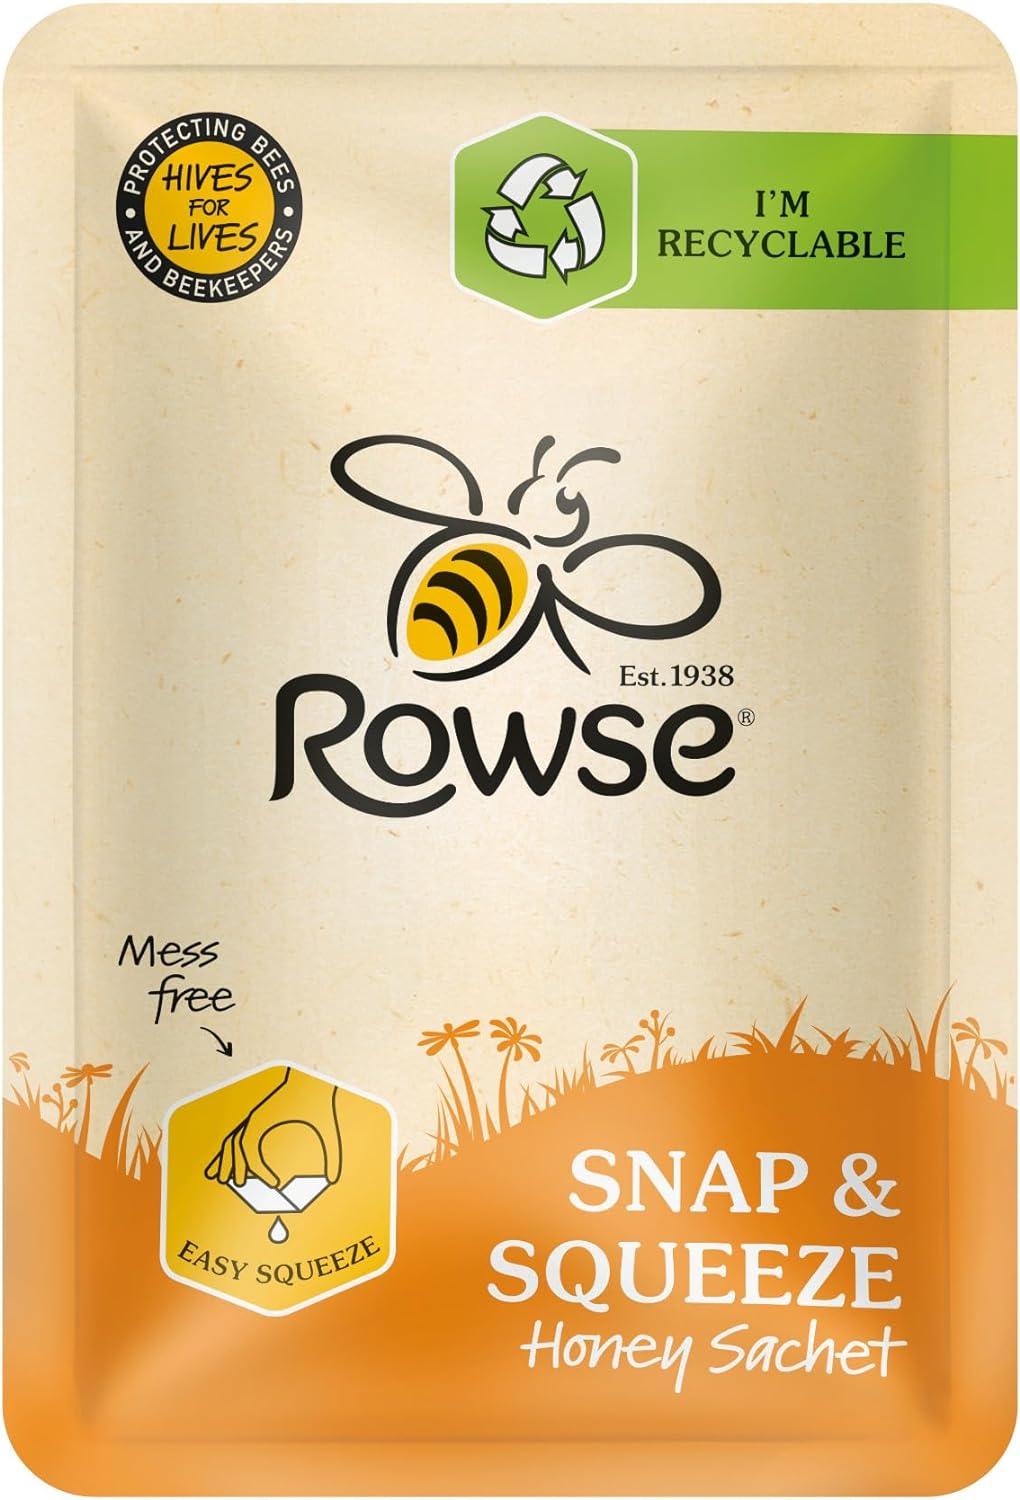 Rowse Honey Sachet - Snap & Squeeze - Paper Sachet - Recyclable - Pack of 75 Individually Wrapped - Vending Superstore